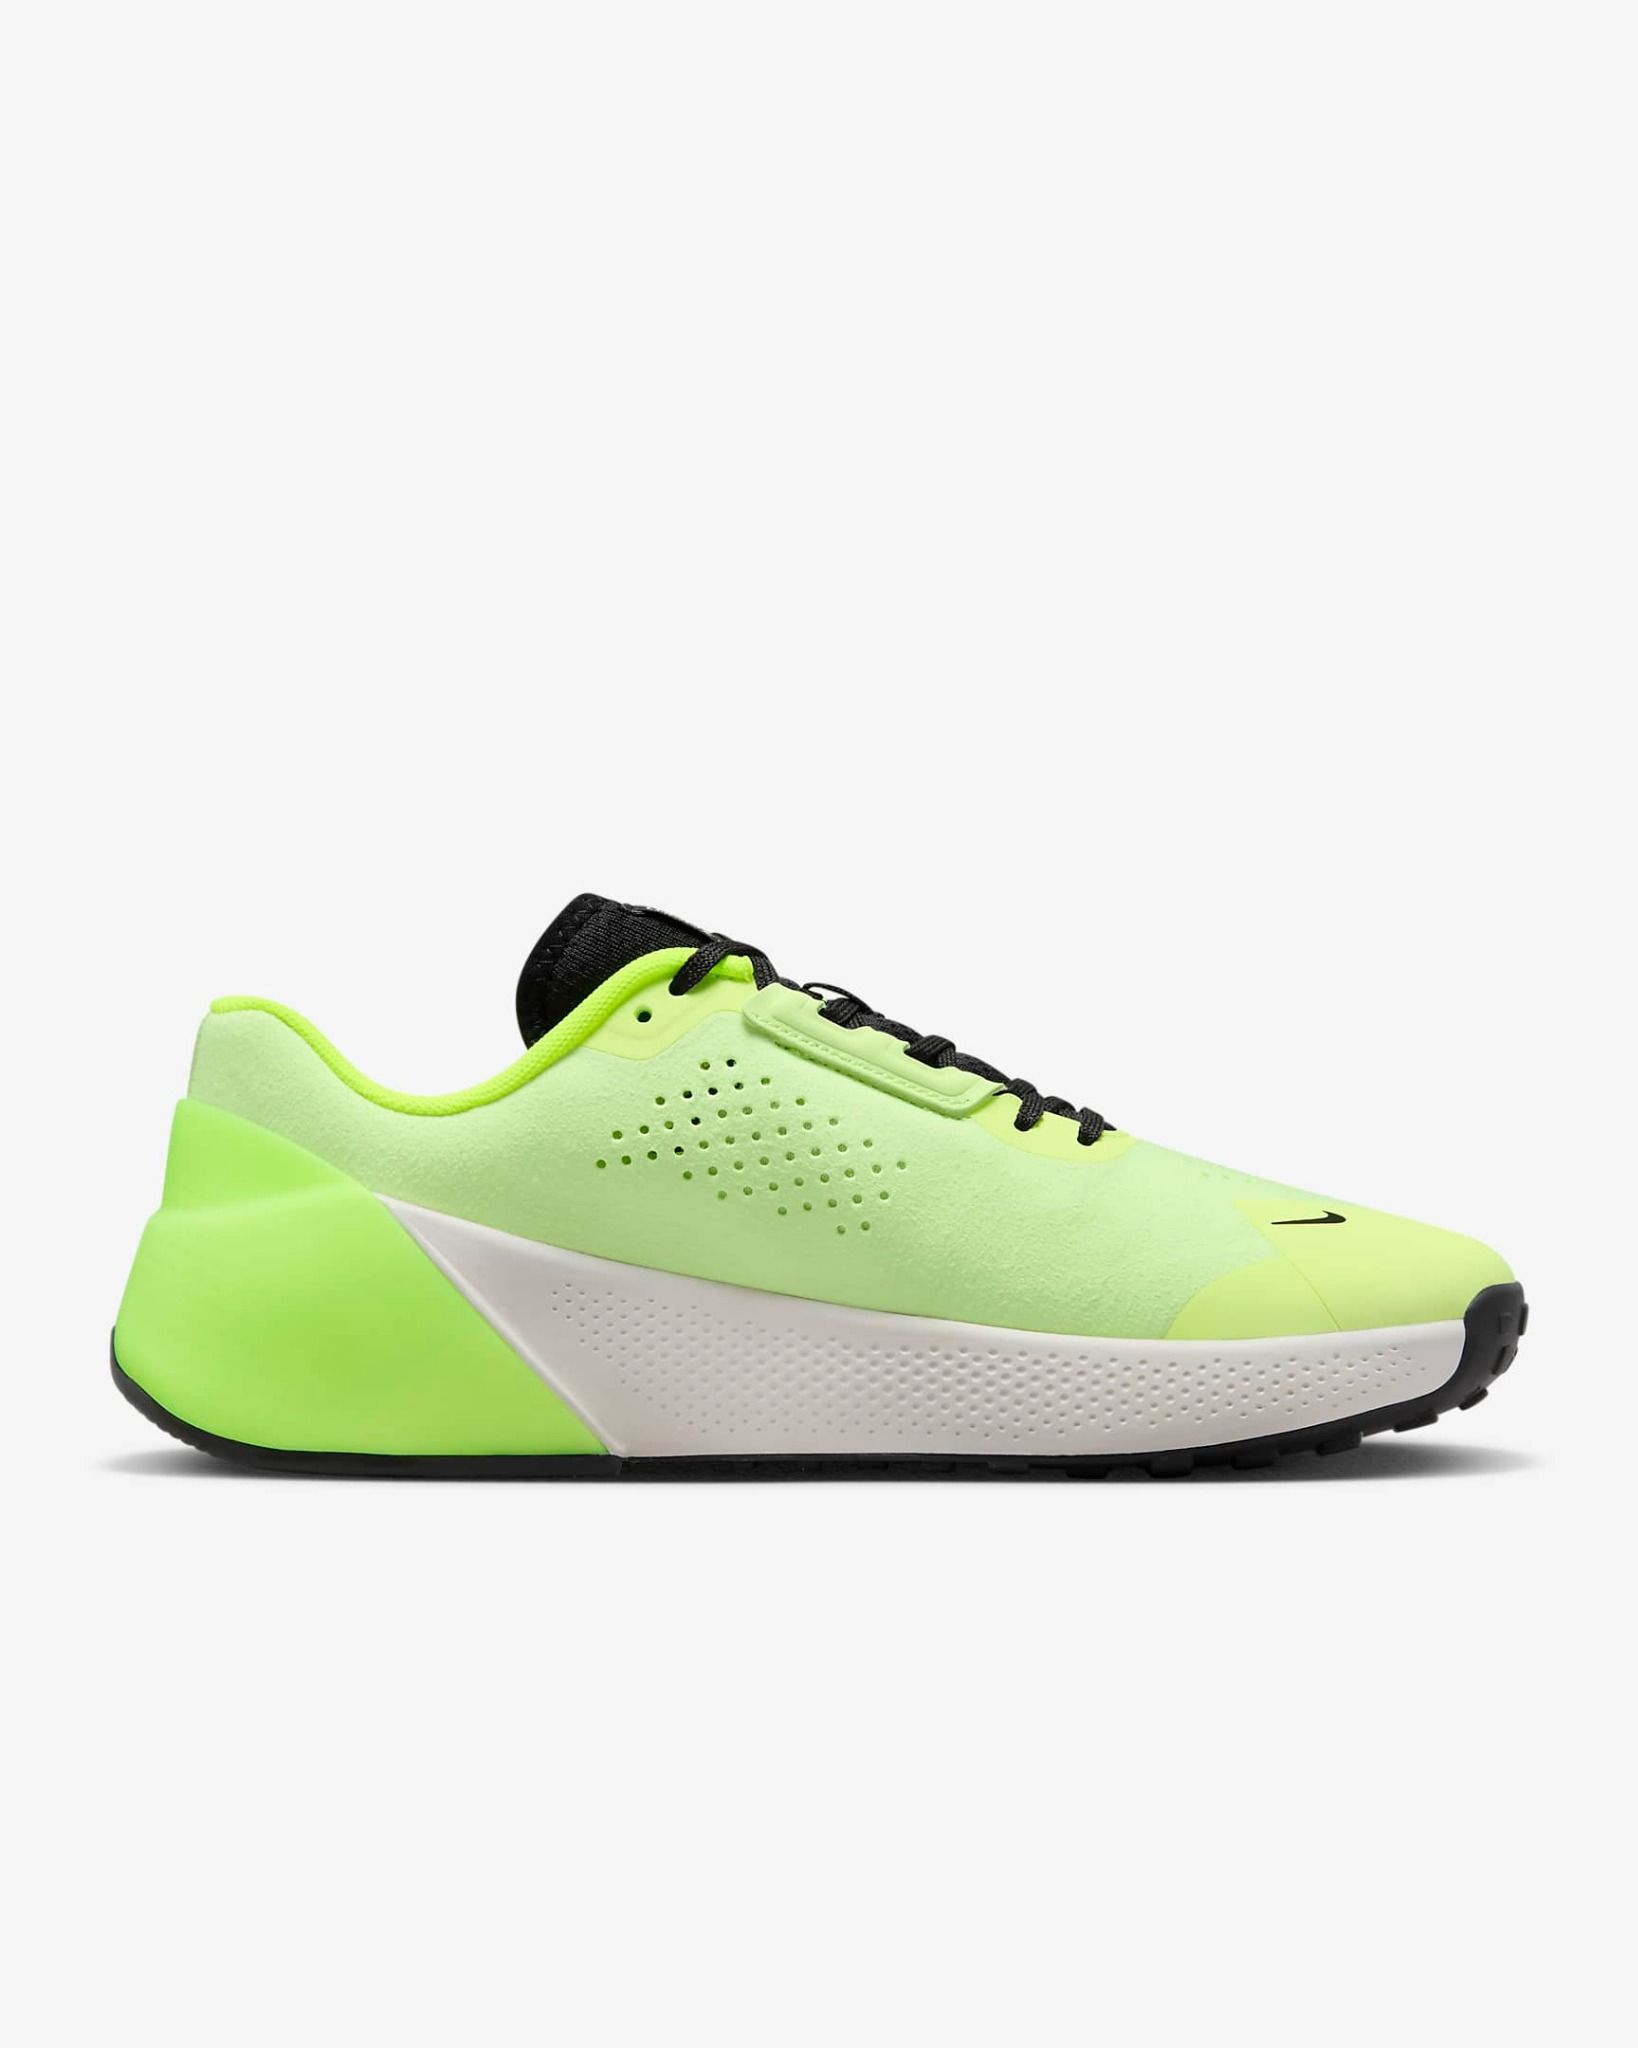 Nike - Giày luyện tập thể thao Nam Air Zoom TR 1 Men's Workout Shoes